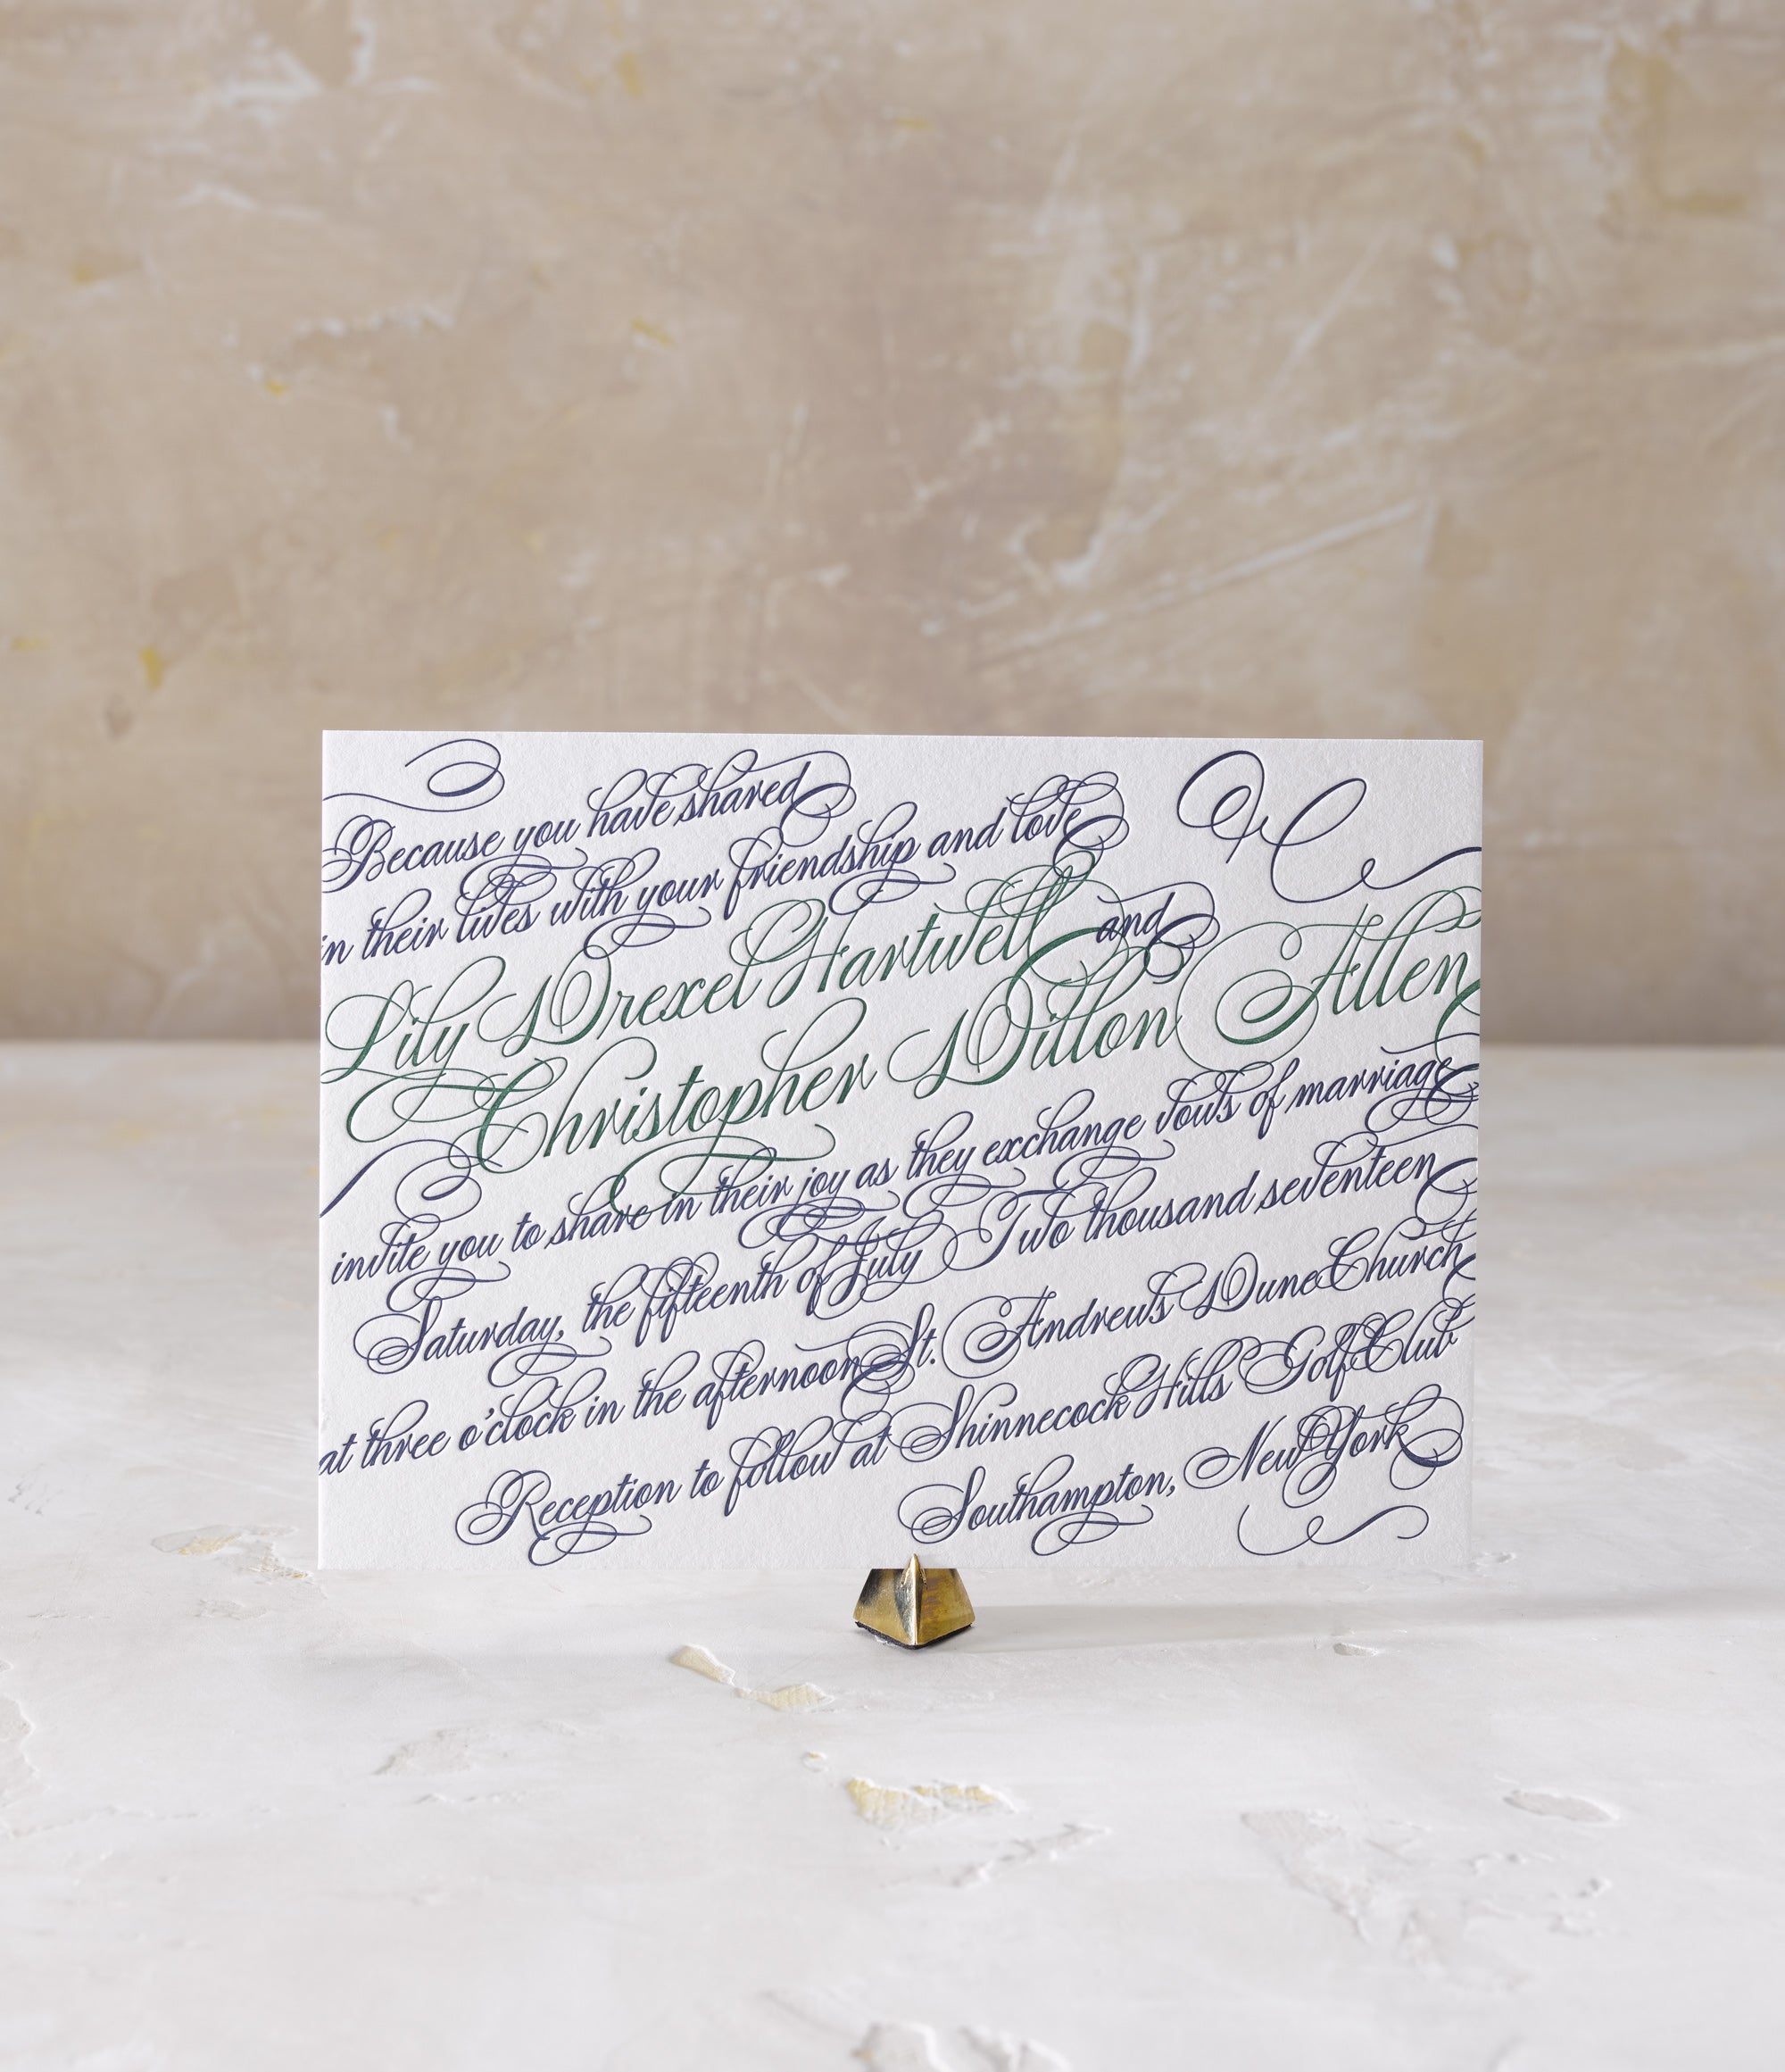 Lily & Dillon is a letterpress wedding suite set in Southampton, New York. Would you like to be featured on #PPRealBride? Email us your photos to hello@pickettspress.com to be featured on our page! Shop here for more Pickett's Press wedding suites!